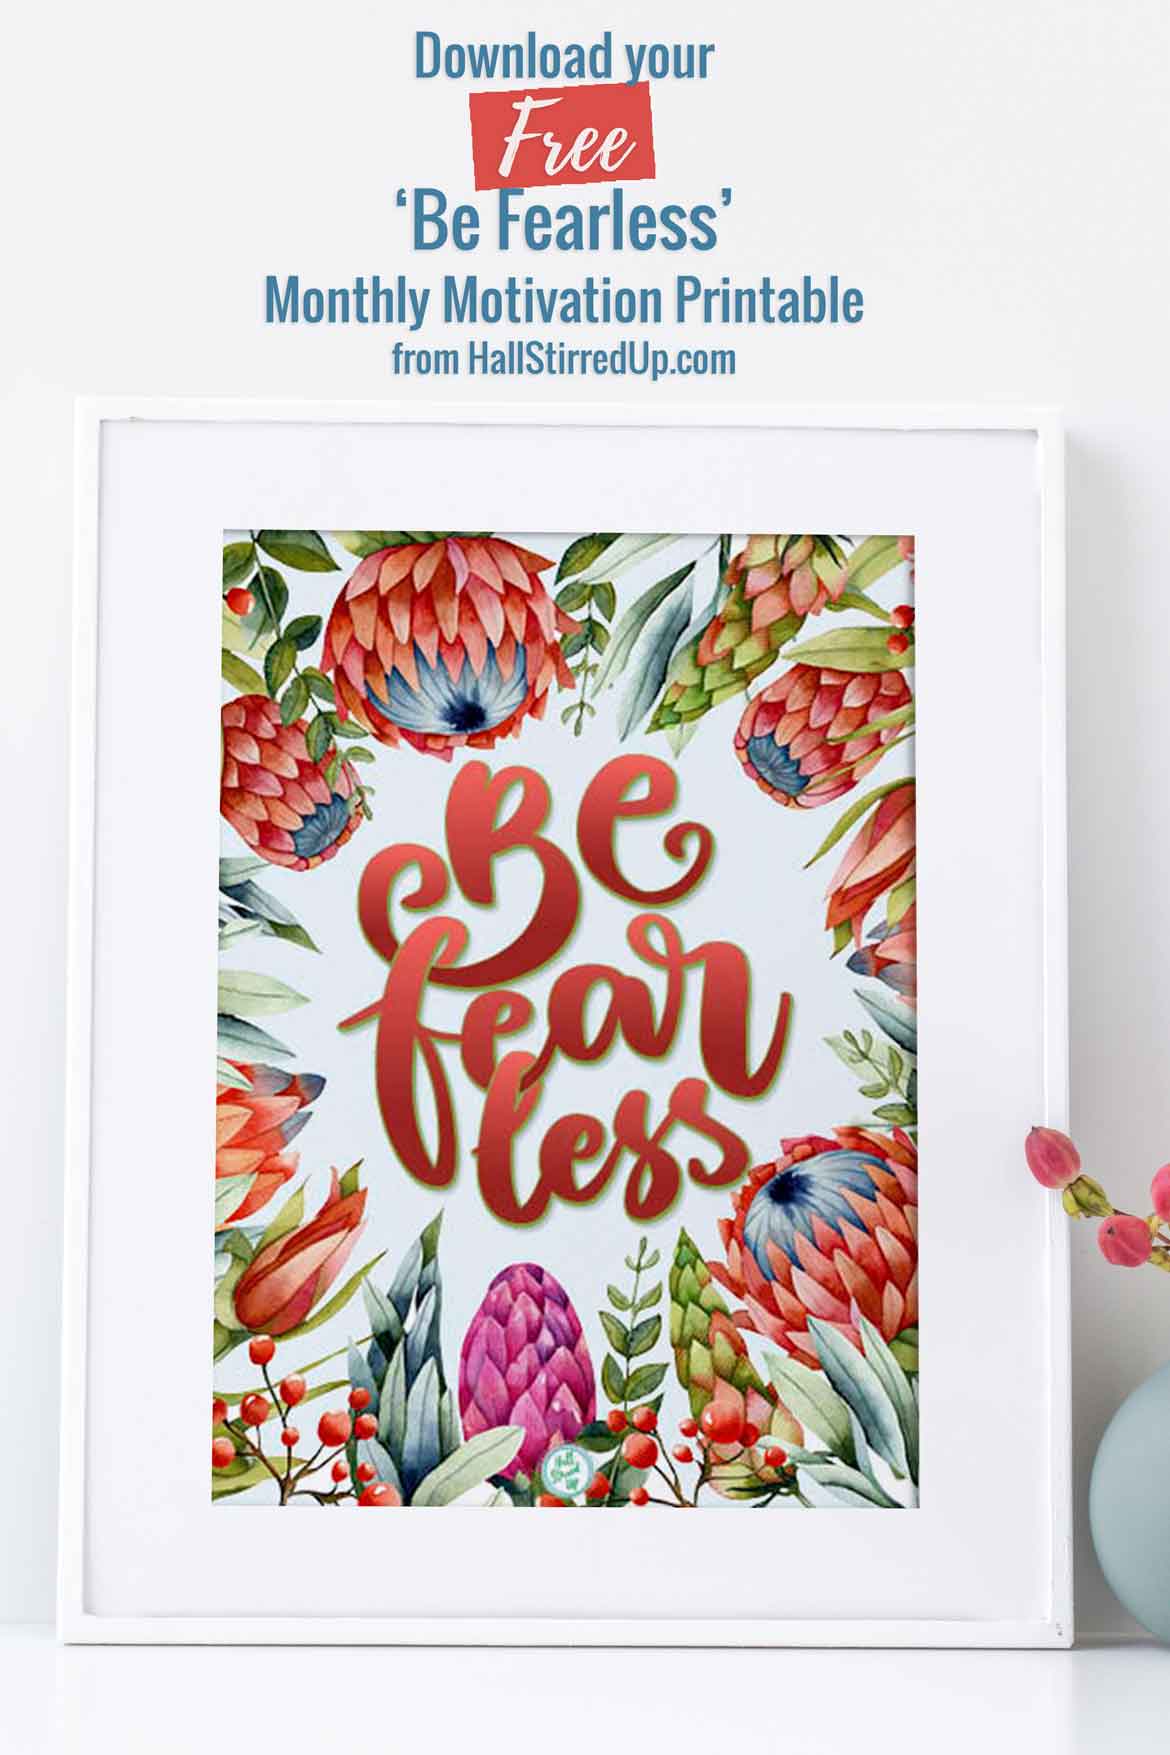 Face down your fears Includes a free 'Be Fearless' Monthly Motivation printable